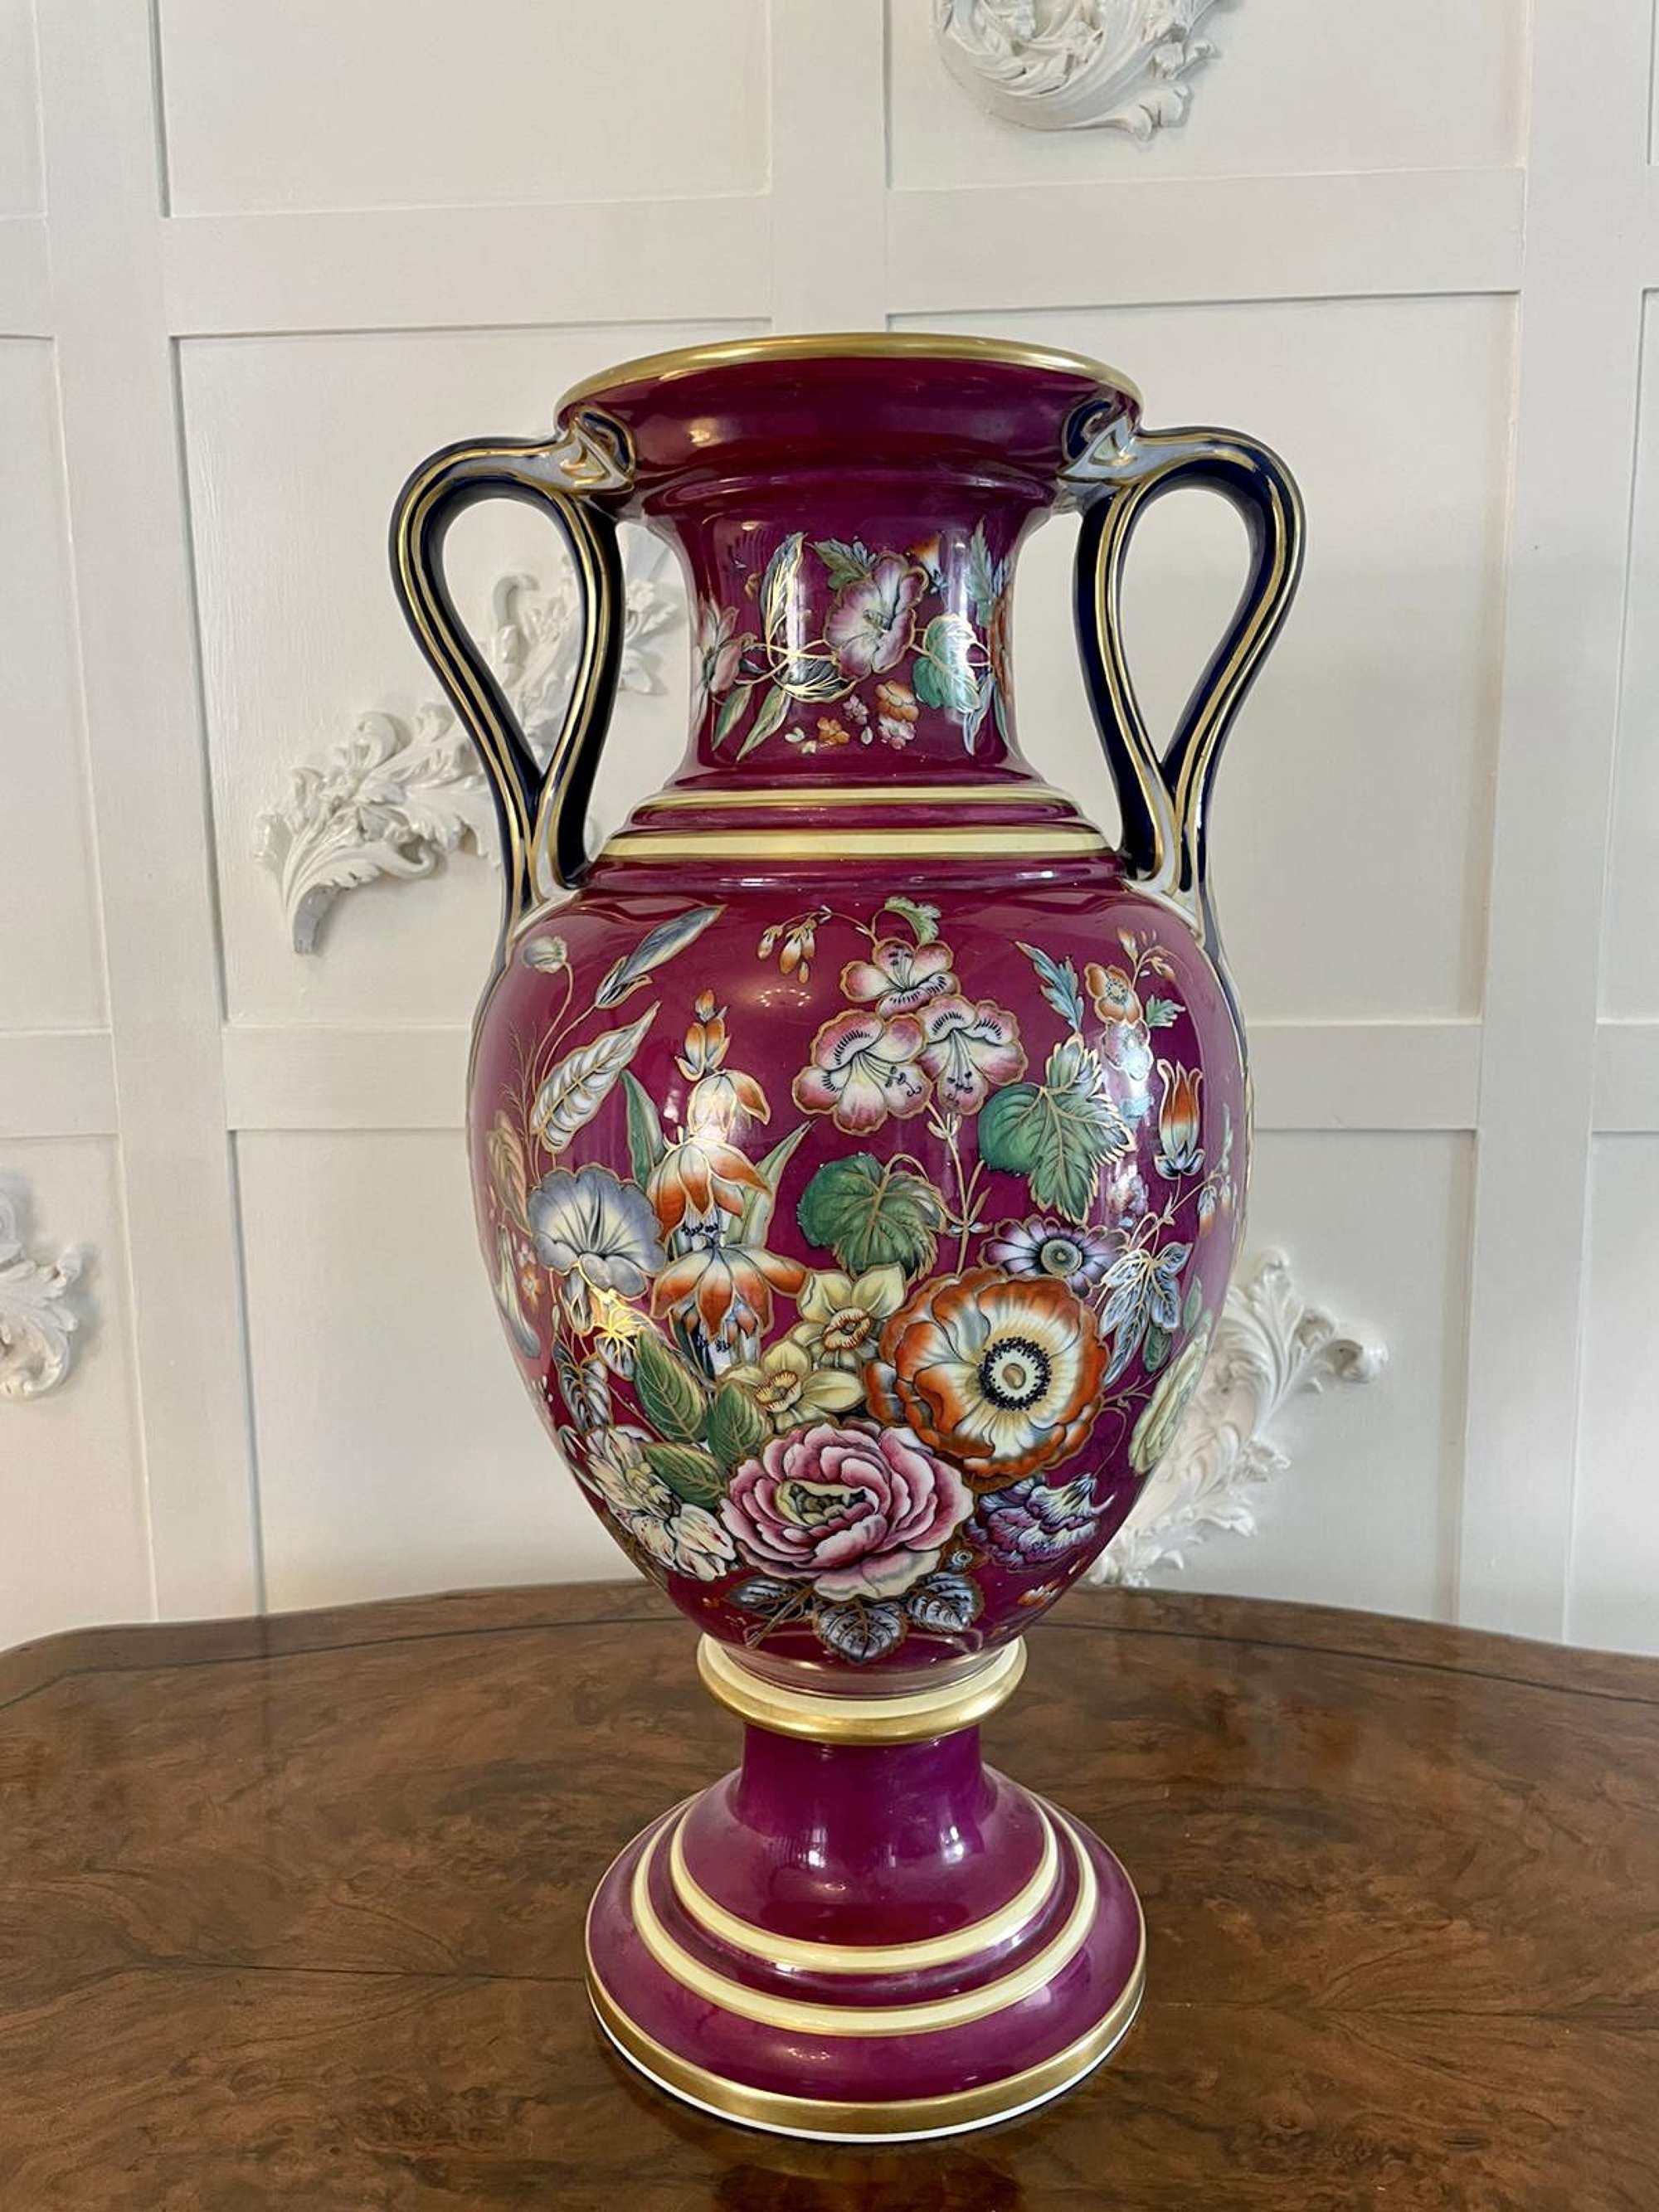 Exceptional Large Staffordshire Porcelaneous Twin Handled Vase